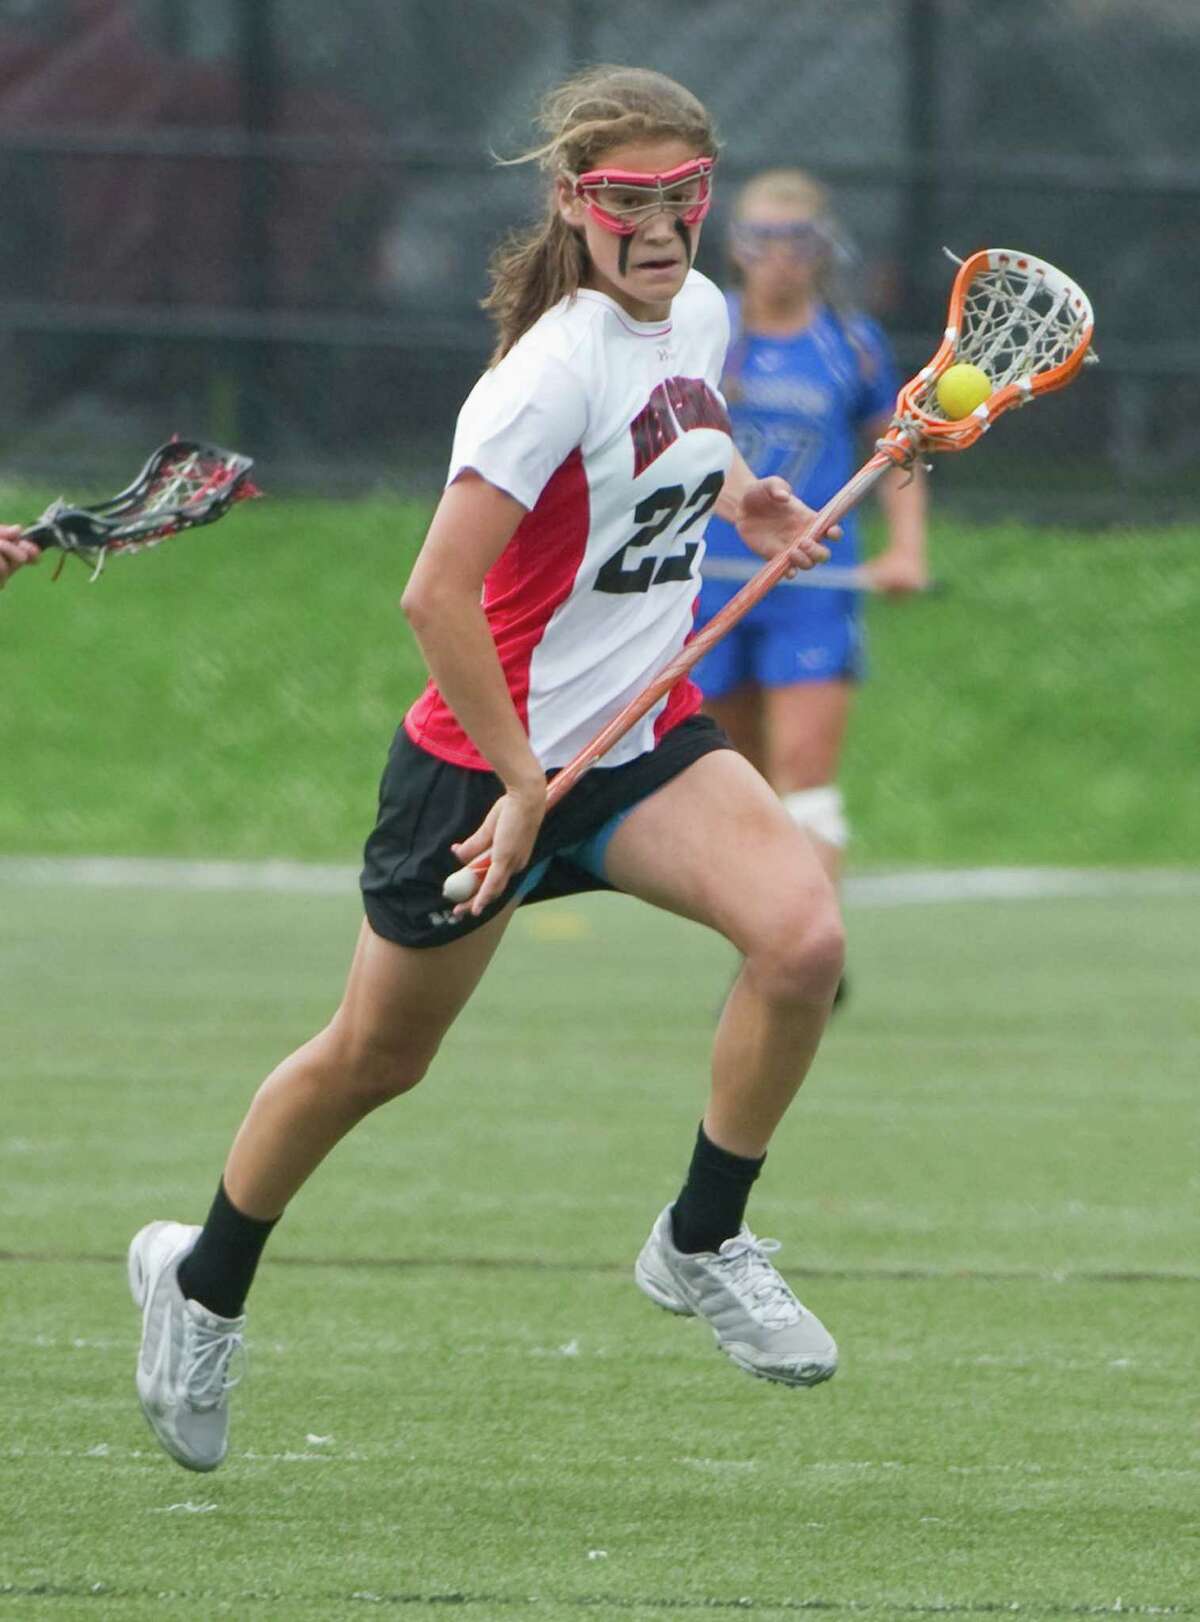 New Canaan girls lacrosse team tops Darien to advance to state semifinals